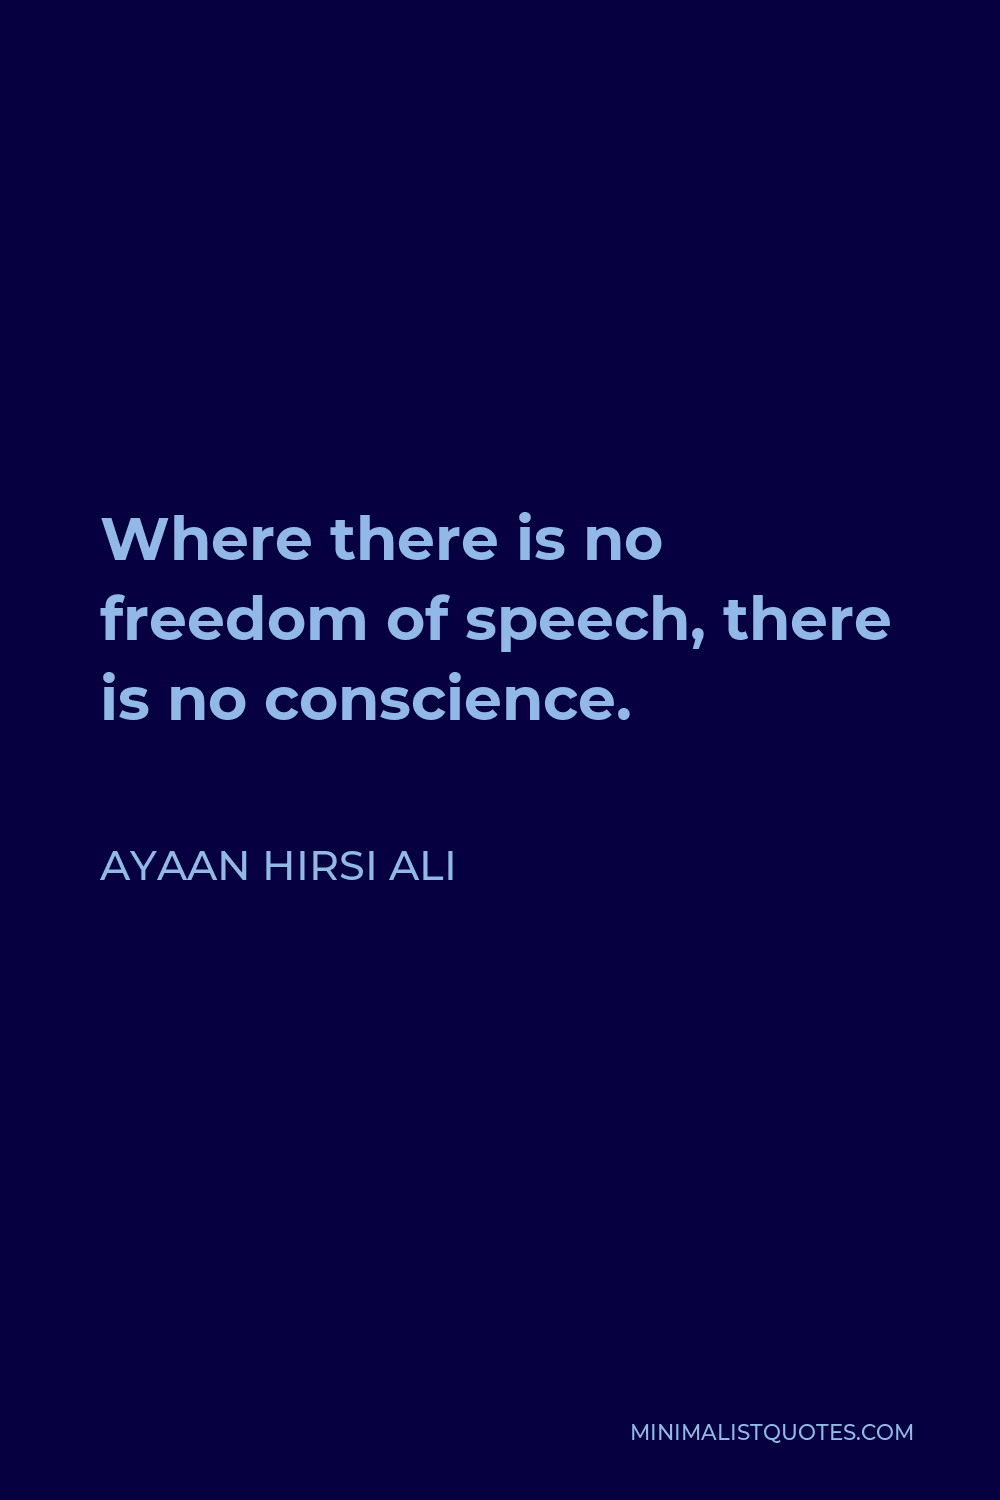 Ayaan Hirsi Ali Quote - Where there is no freedom of speech, there is no conscience.